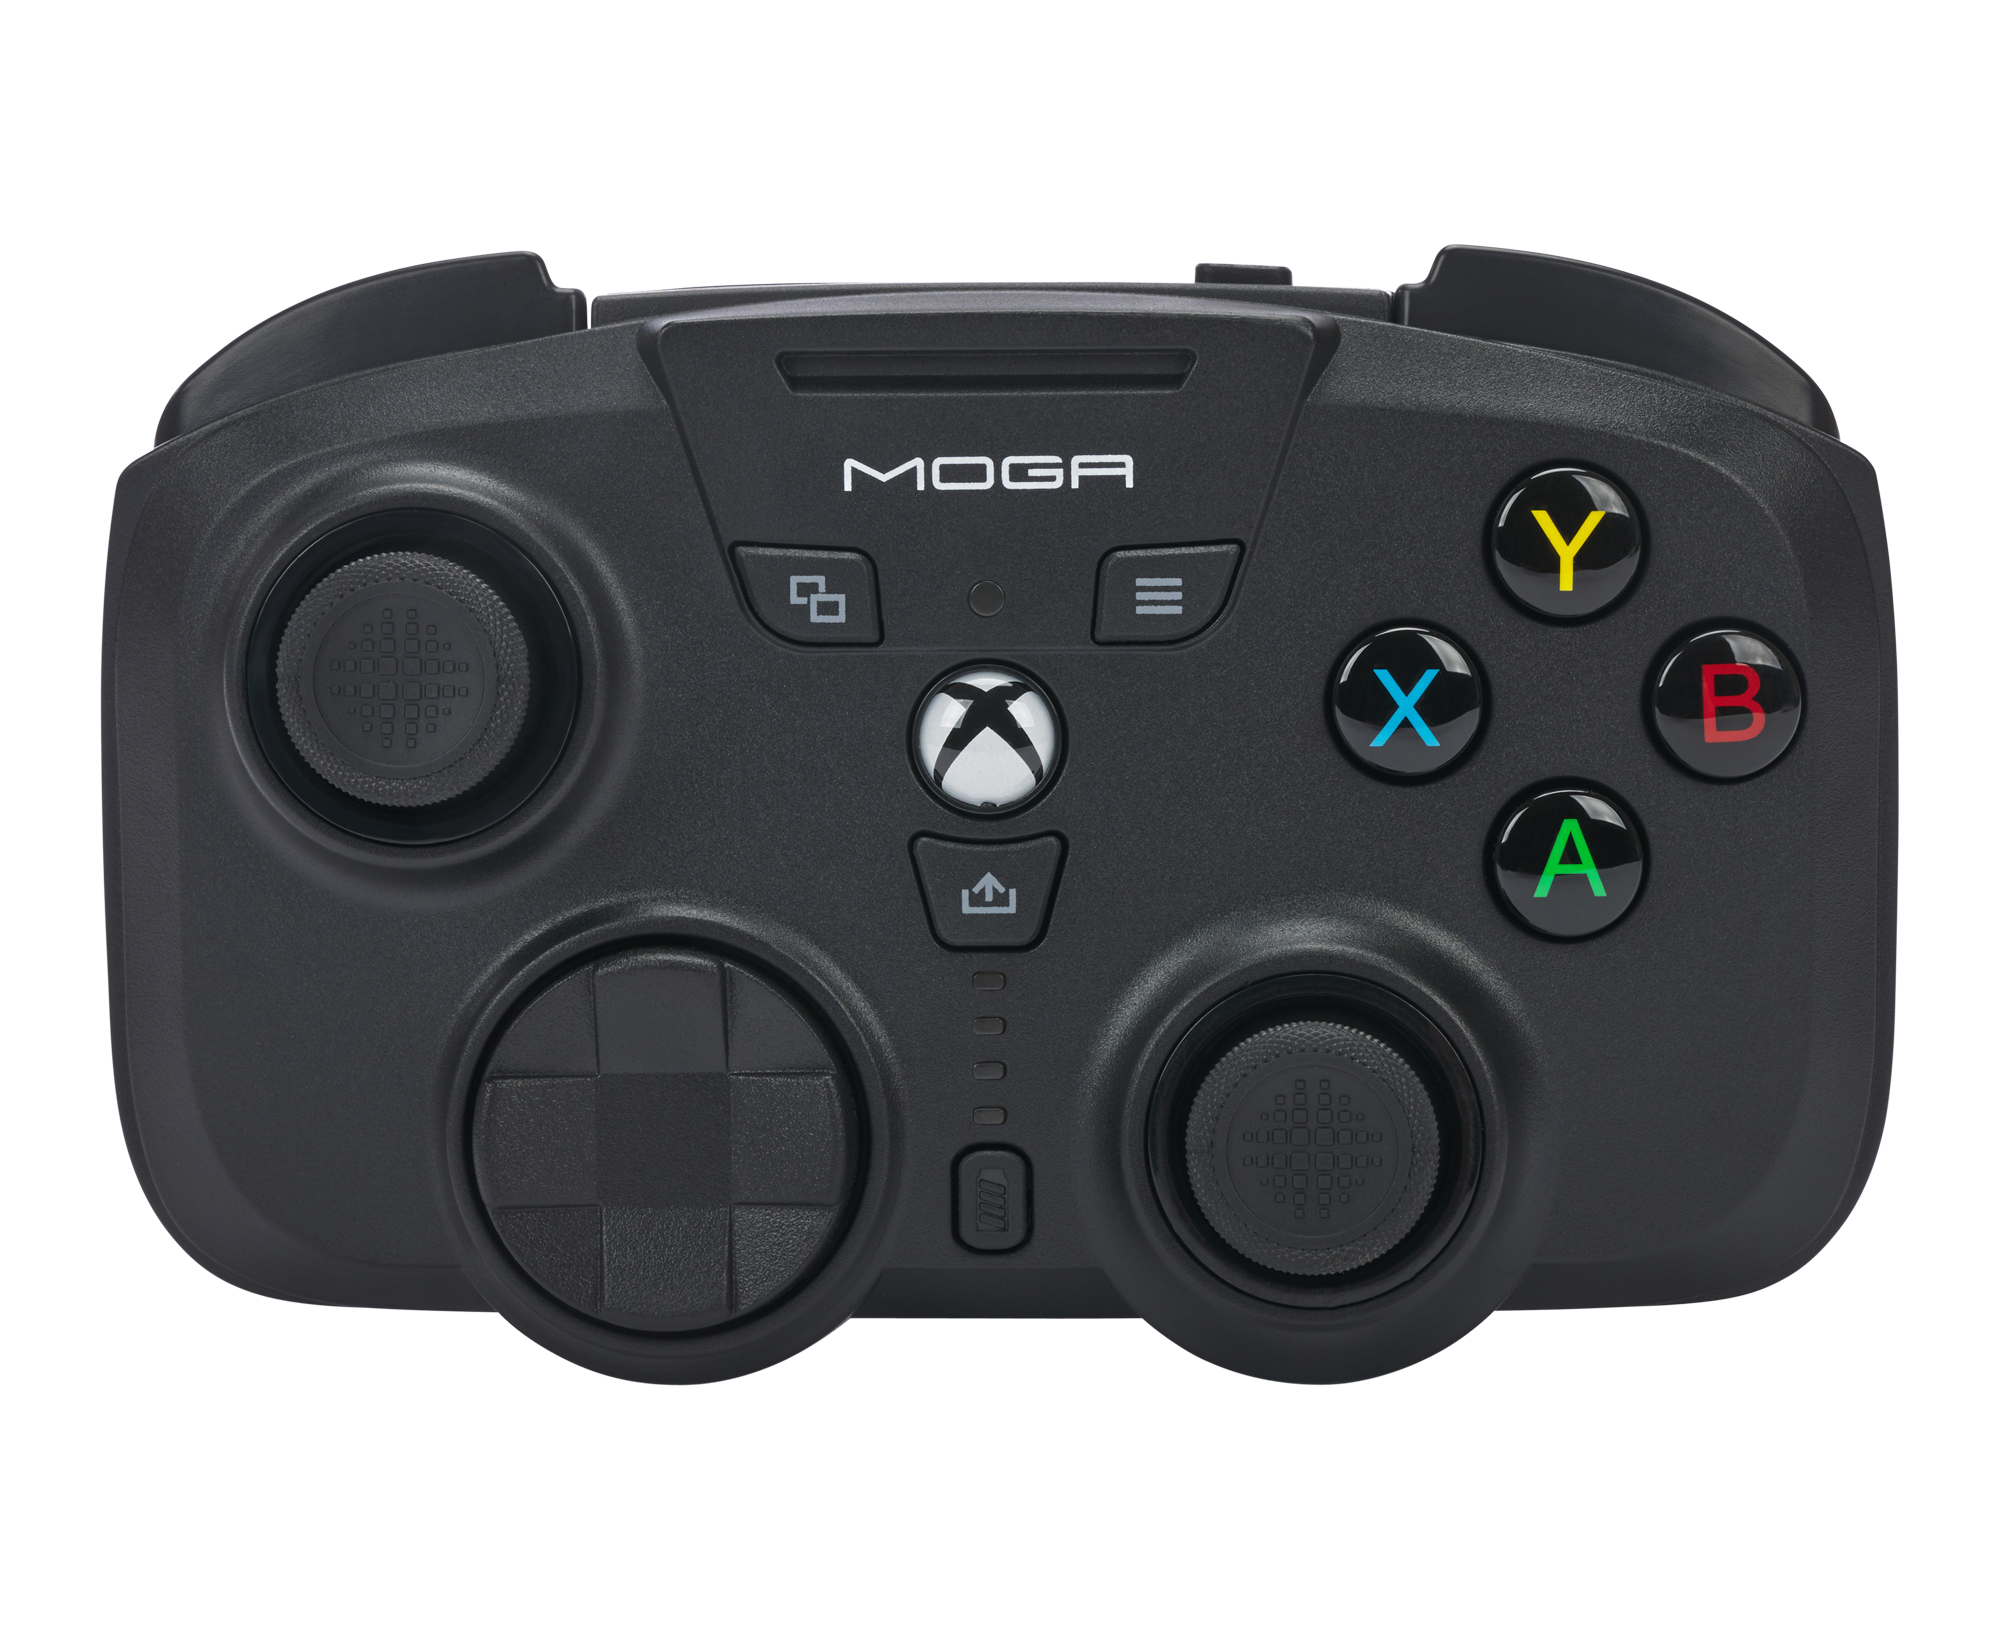 MOGA XP-ULTRA Multi-Platform Wireless Controller for Mobile, PC and Xbox  Series X, S, Mobile Gaming Xbox Controllers, MOGA